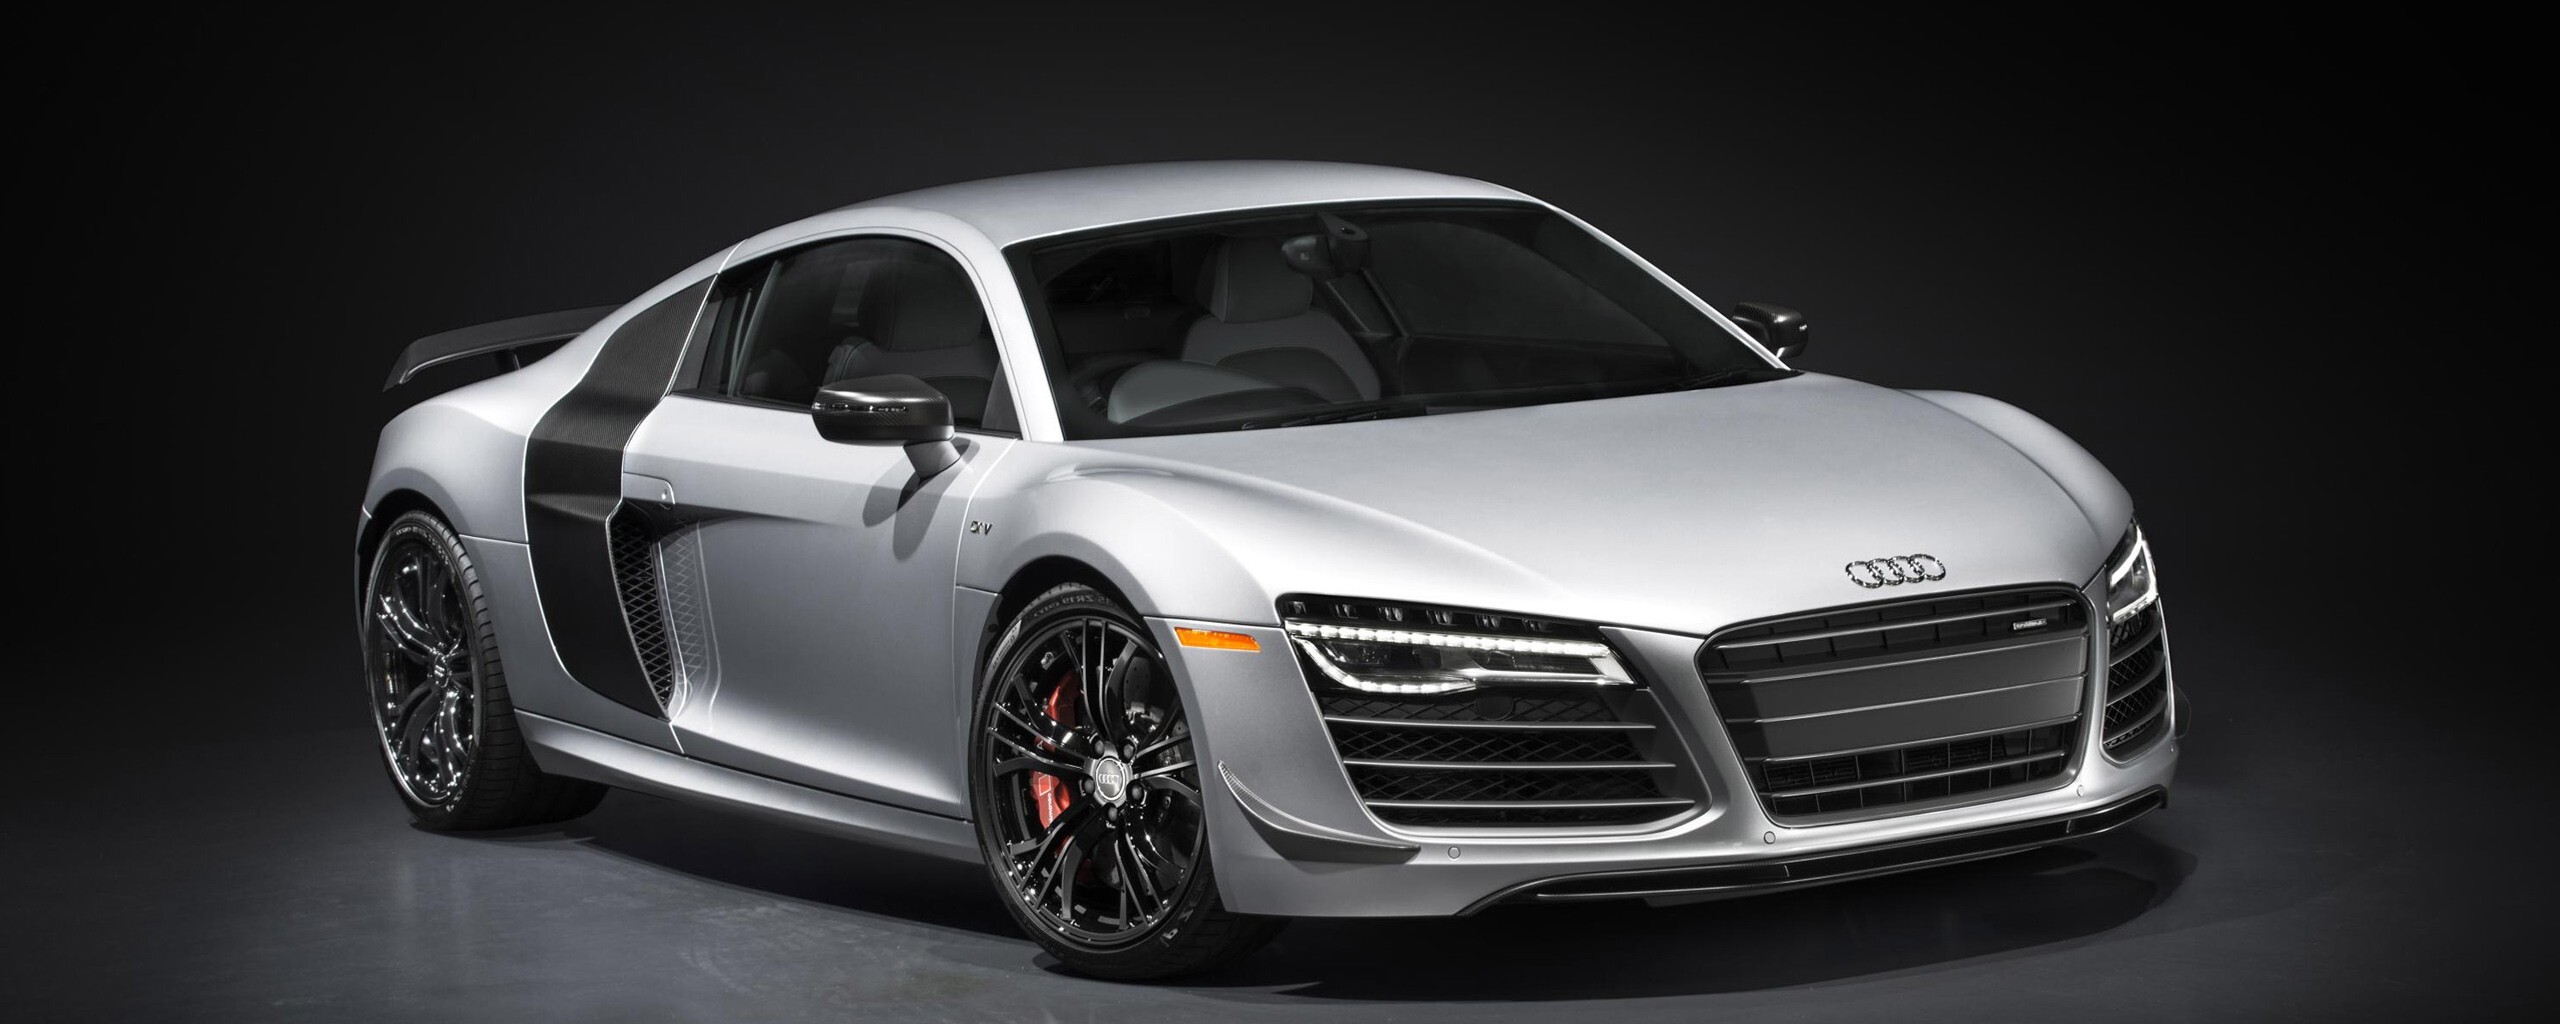 audi-r8-competition.jpg